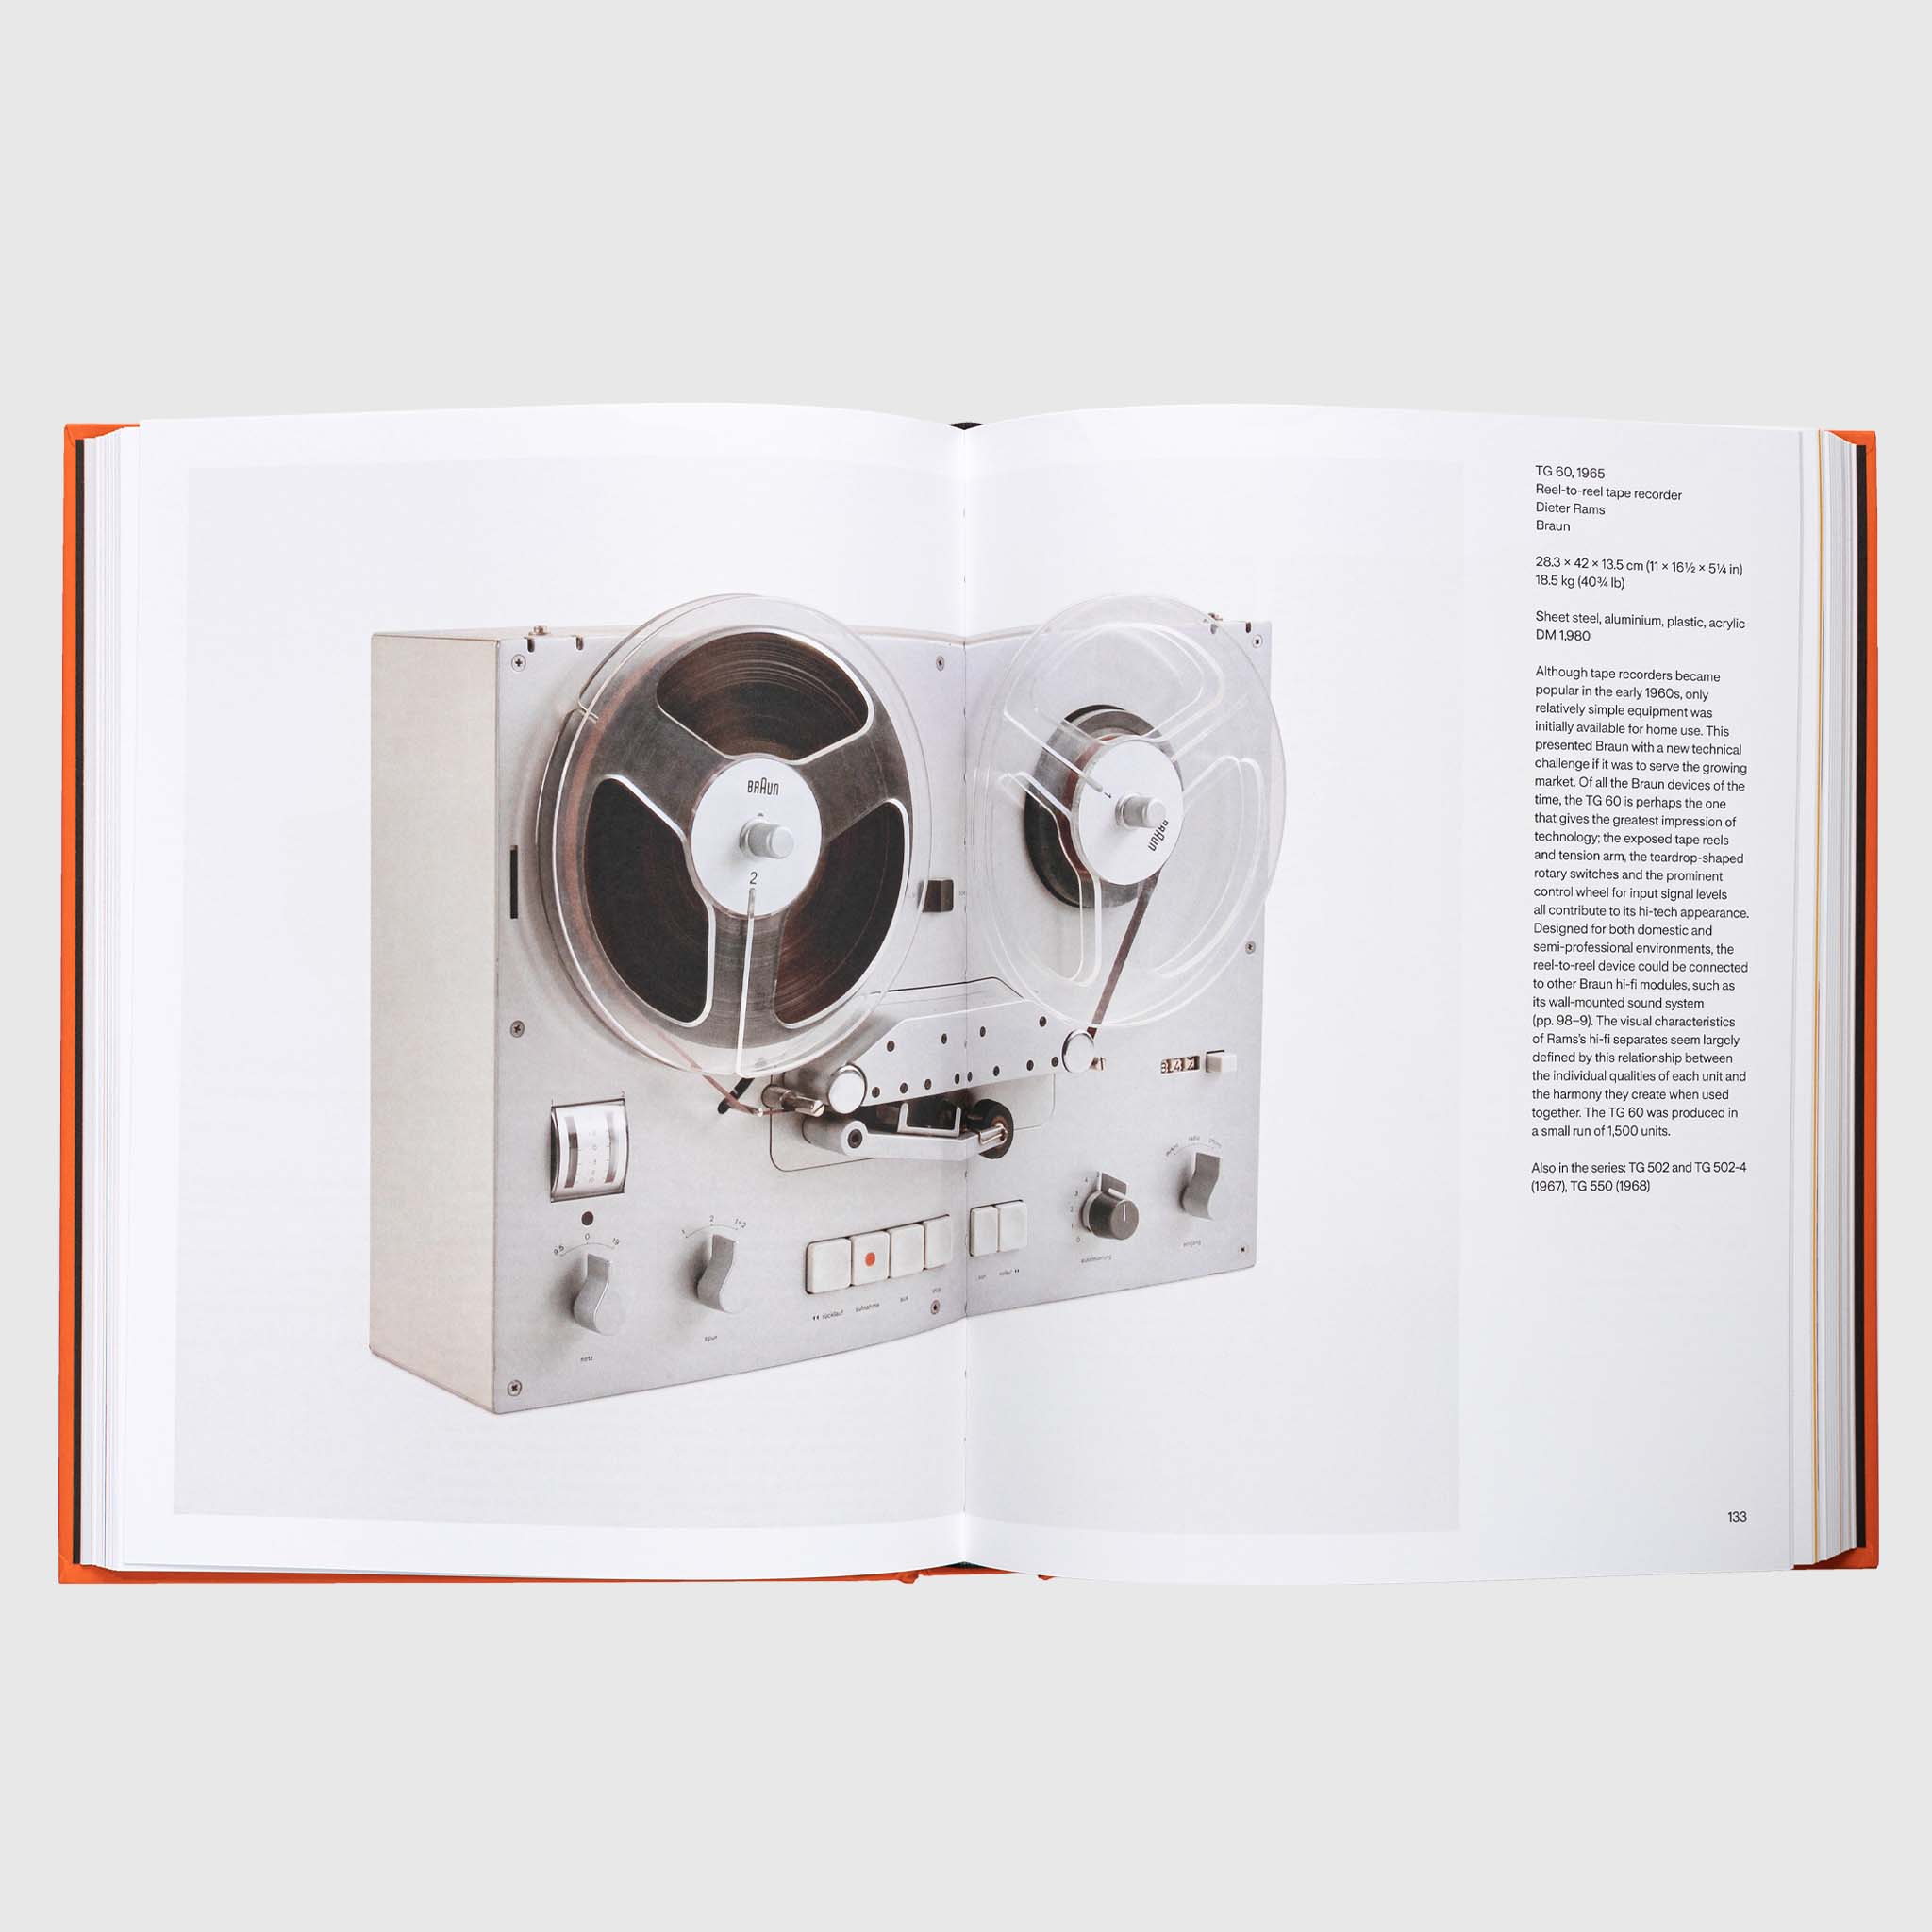 DIETER RAMS: THE COMPLETE WORKS